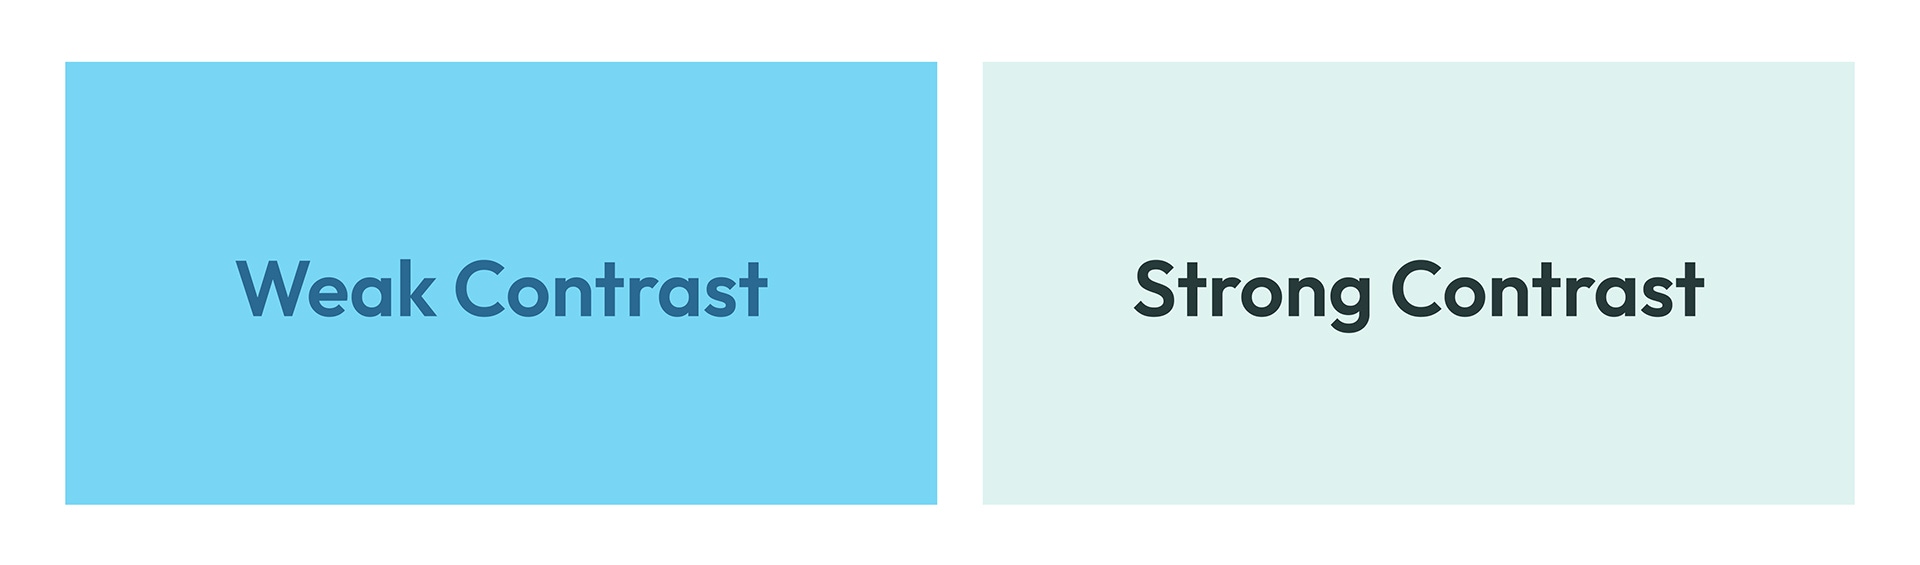 An example of weak color contrast next to strong color contrast. There are two examples, the first says 'weak contrast' and shows two colors that are not very distinguishable, rendering the text illegible. The second example says 'strong contrast' and shows two colors that meet accessibility color standards.